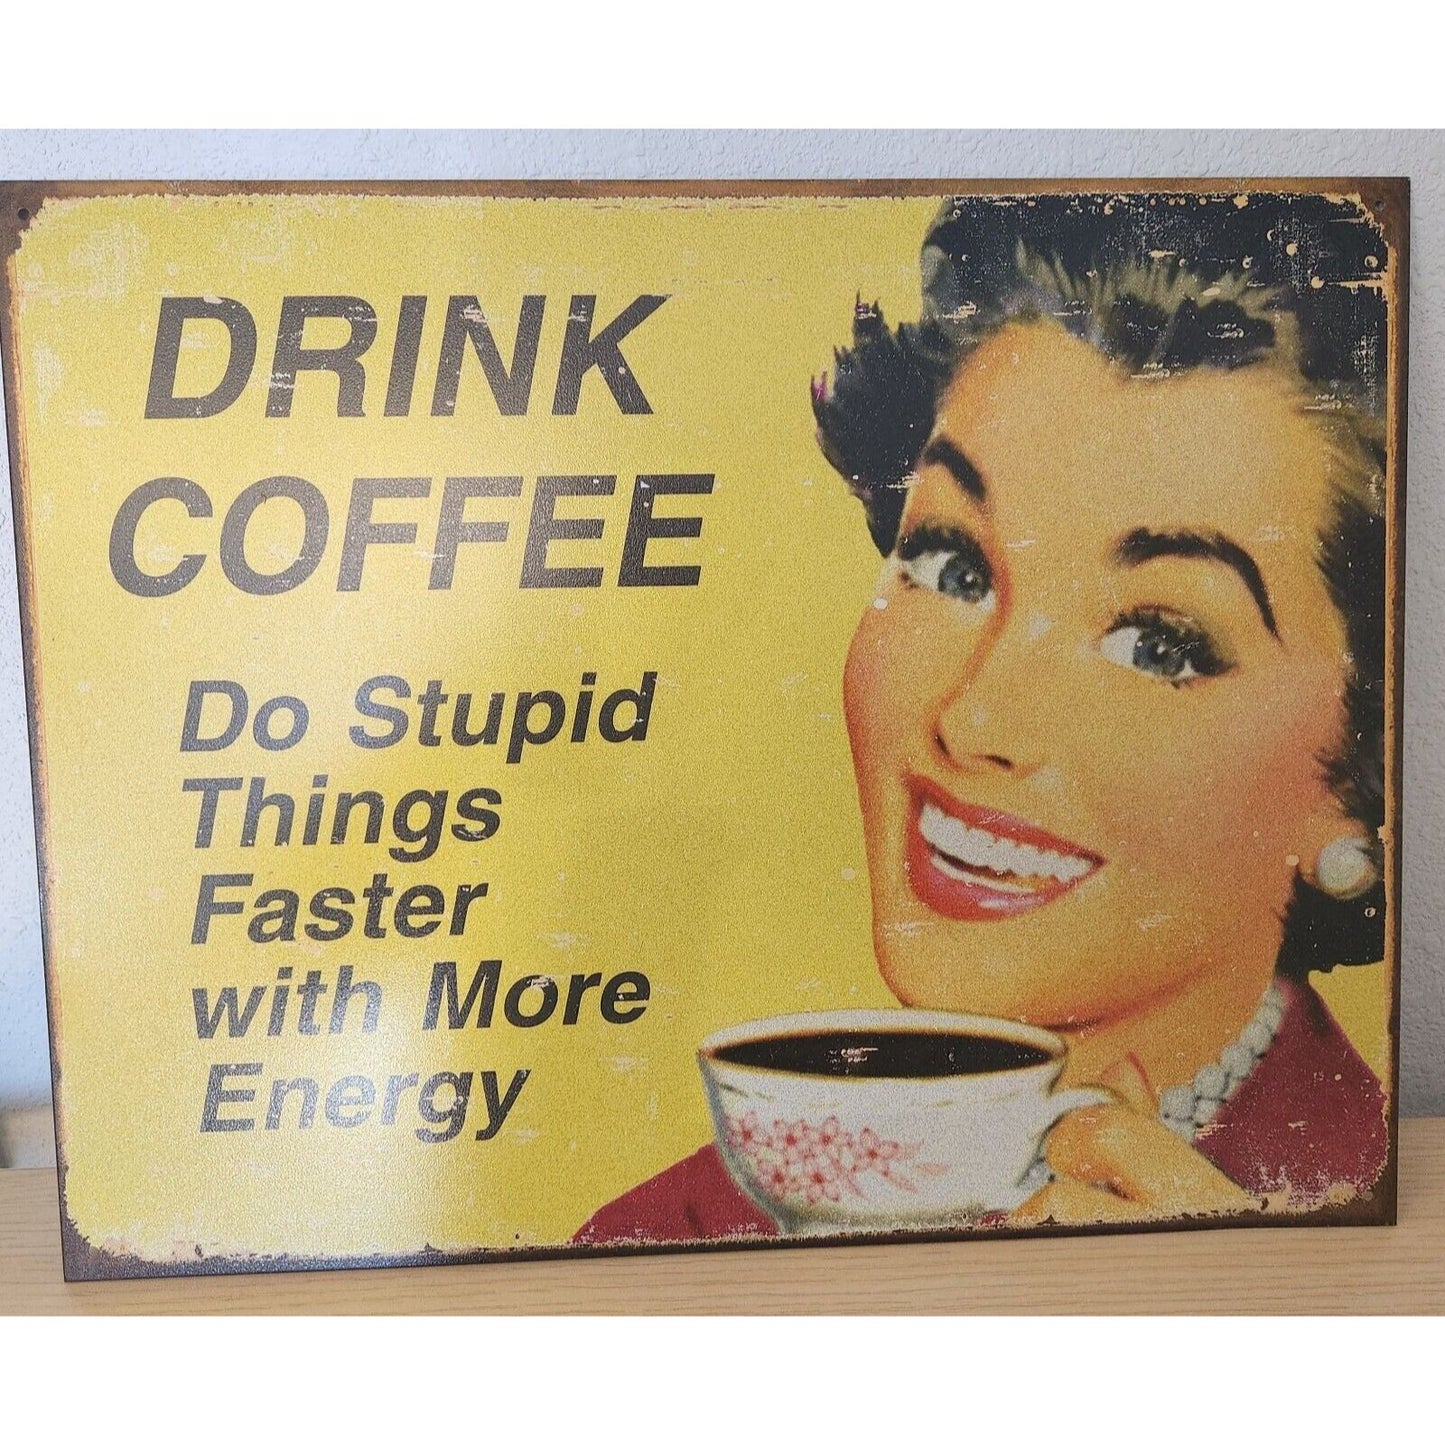 Metal Signs says " Drink Coffee Do Stupid Things Faster with More Energy"